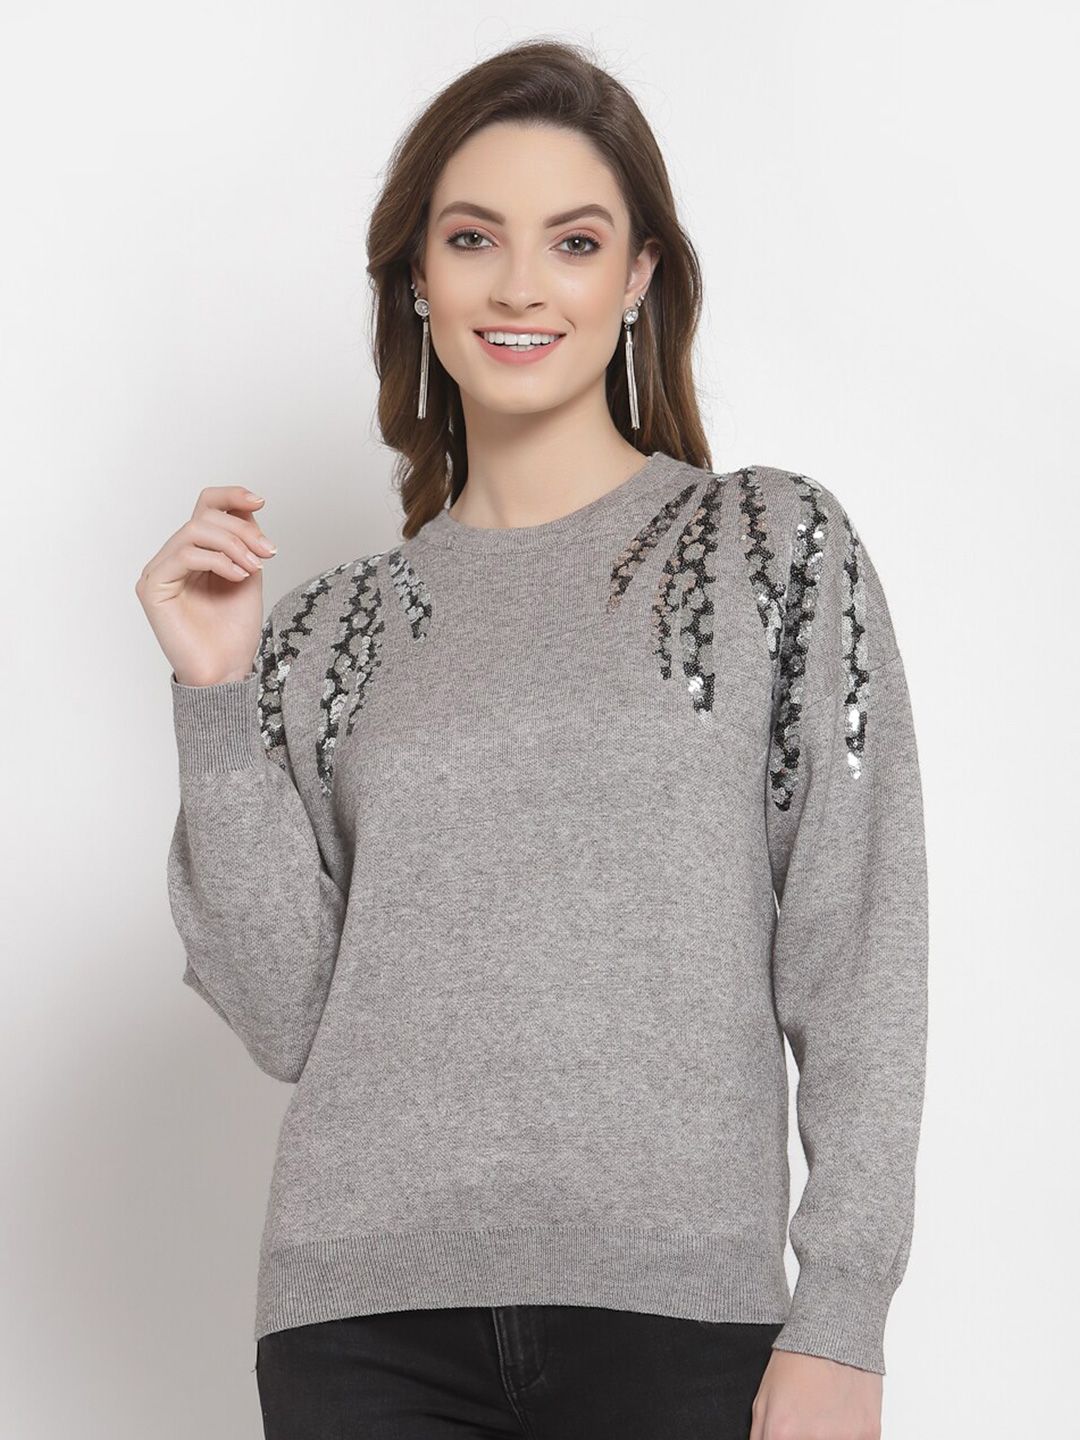 Mafadeny Women Grey & Black Floral Embellished Pullover Price in India